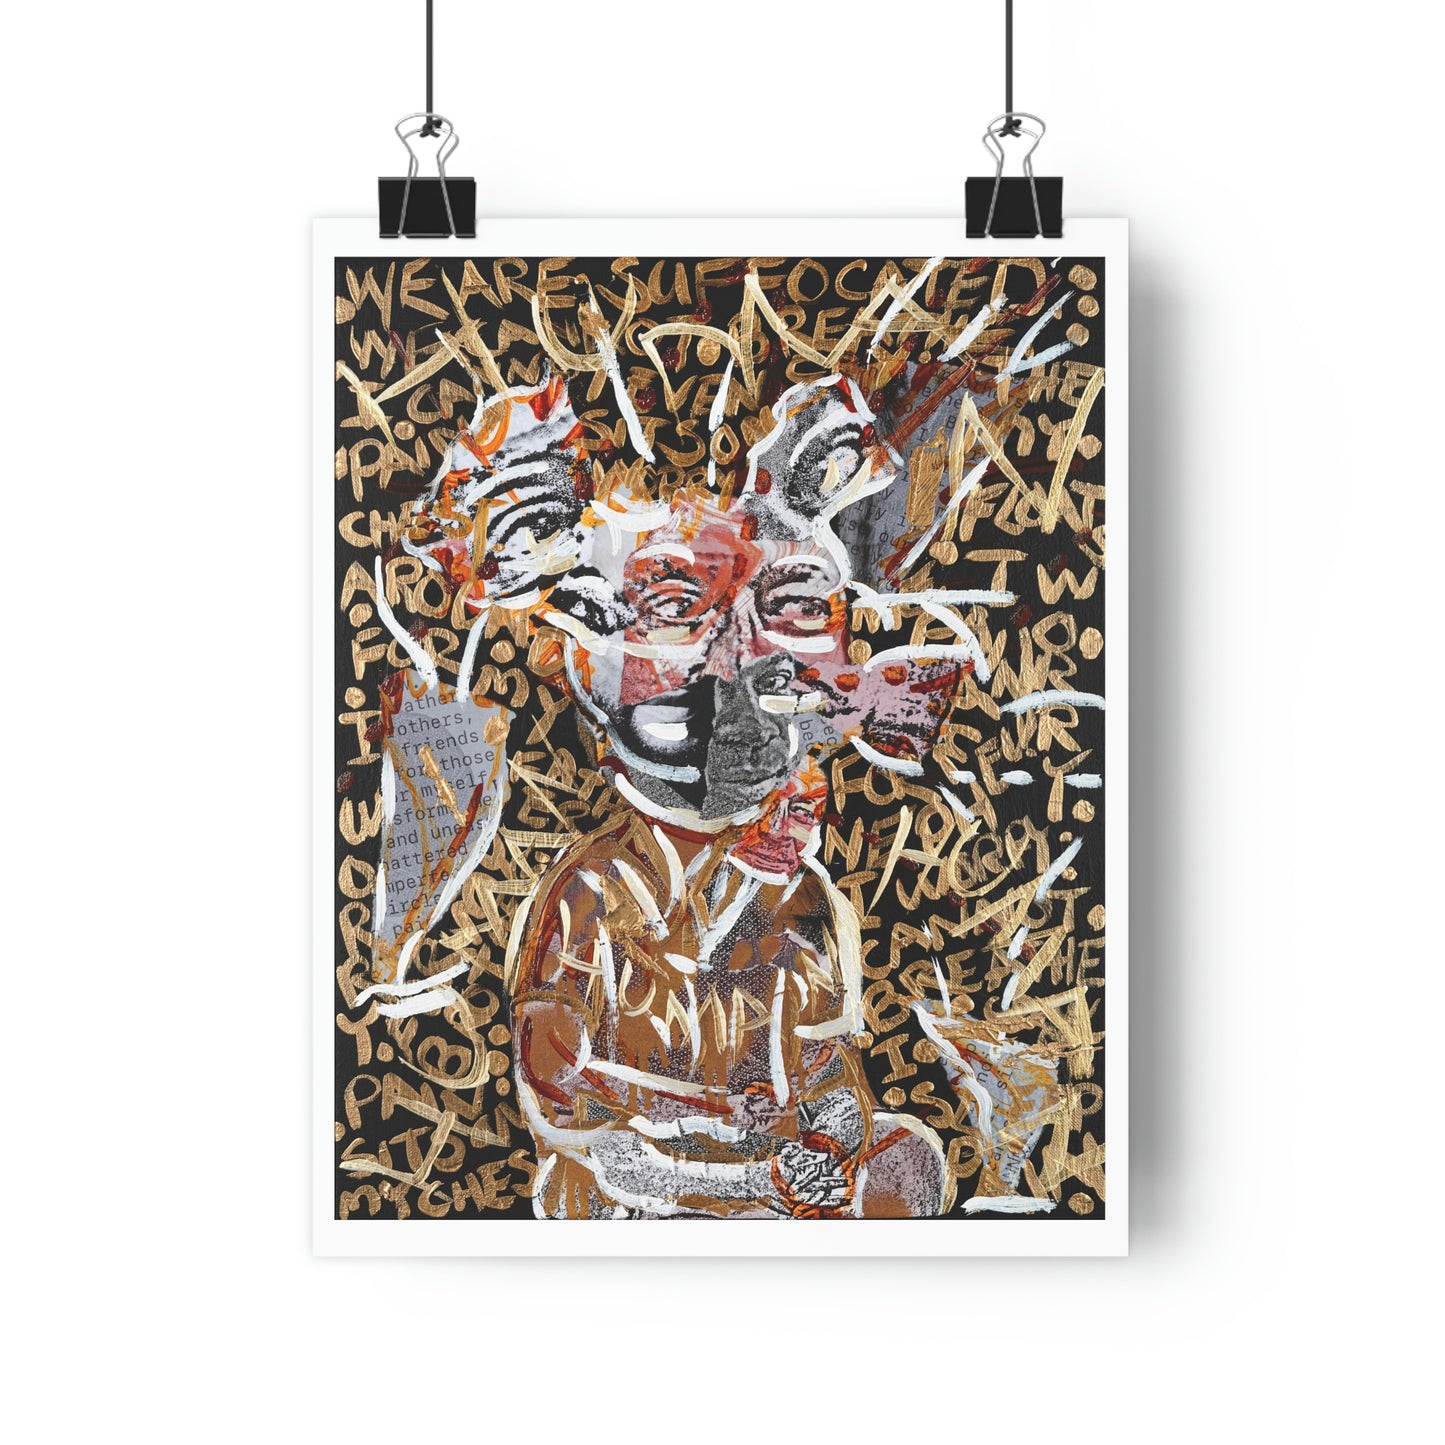 Worry. Anger. Systemic. Pandemic. Giclée Art Print